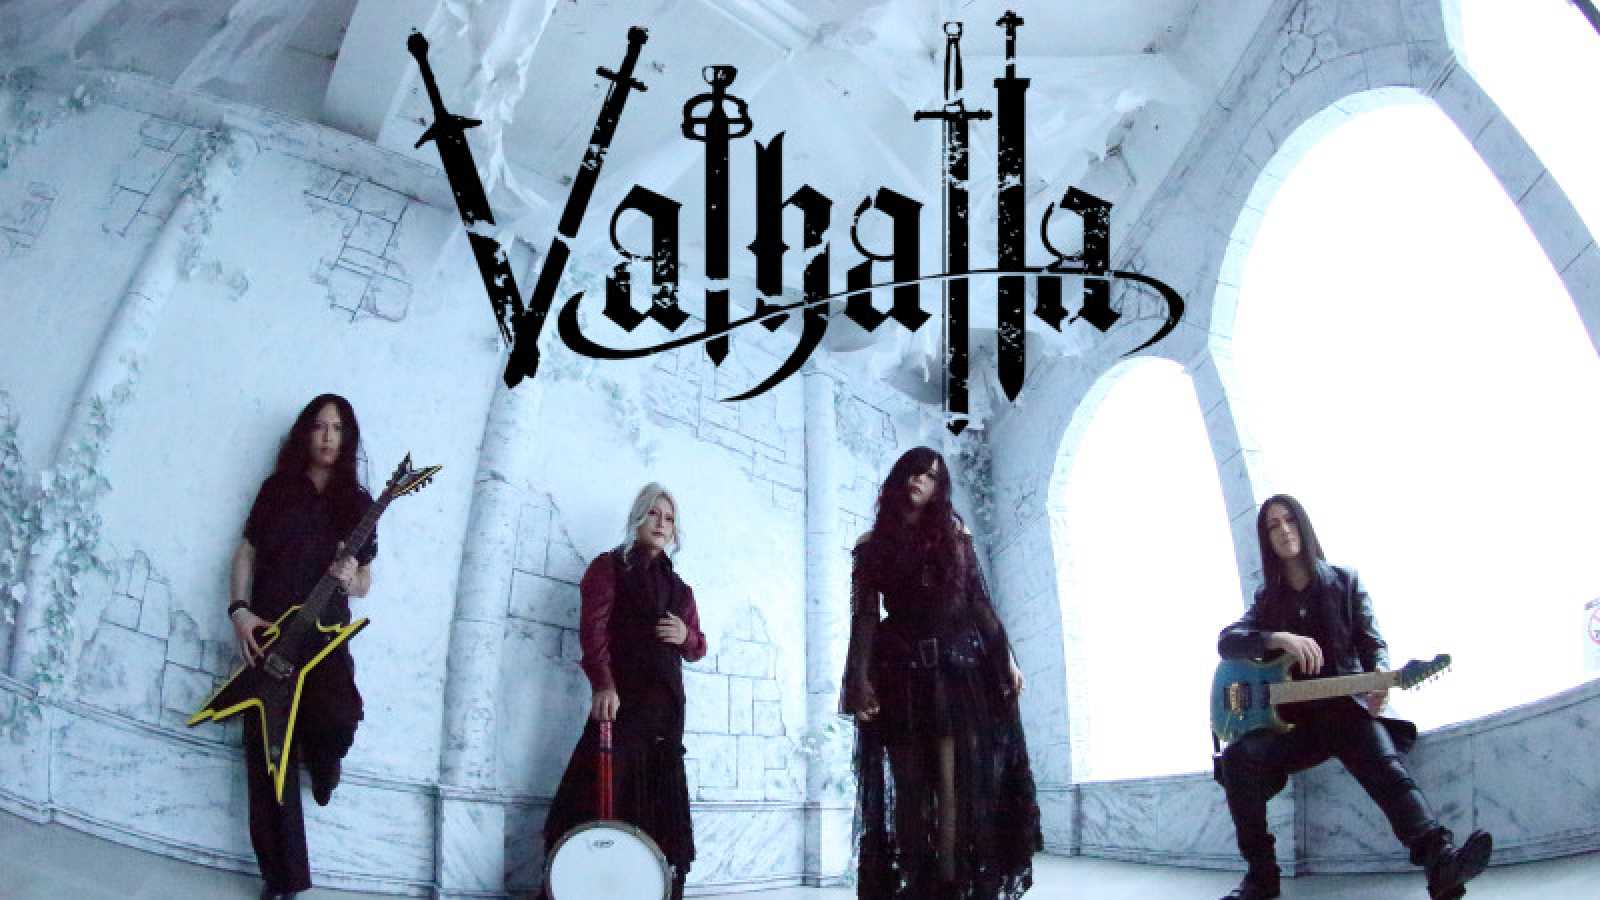 New Single from Valhalla © Valhalla. All rights reserved.